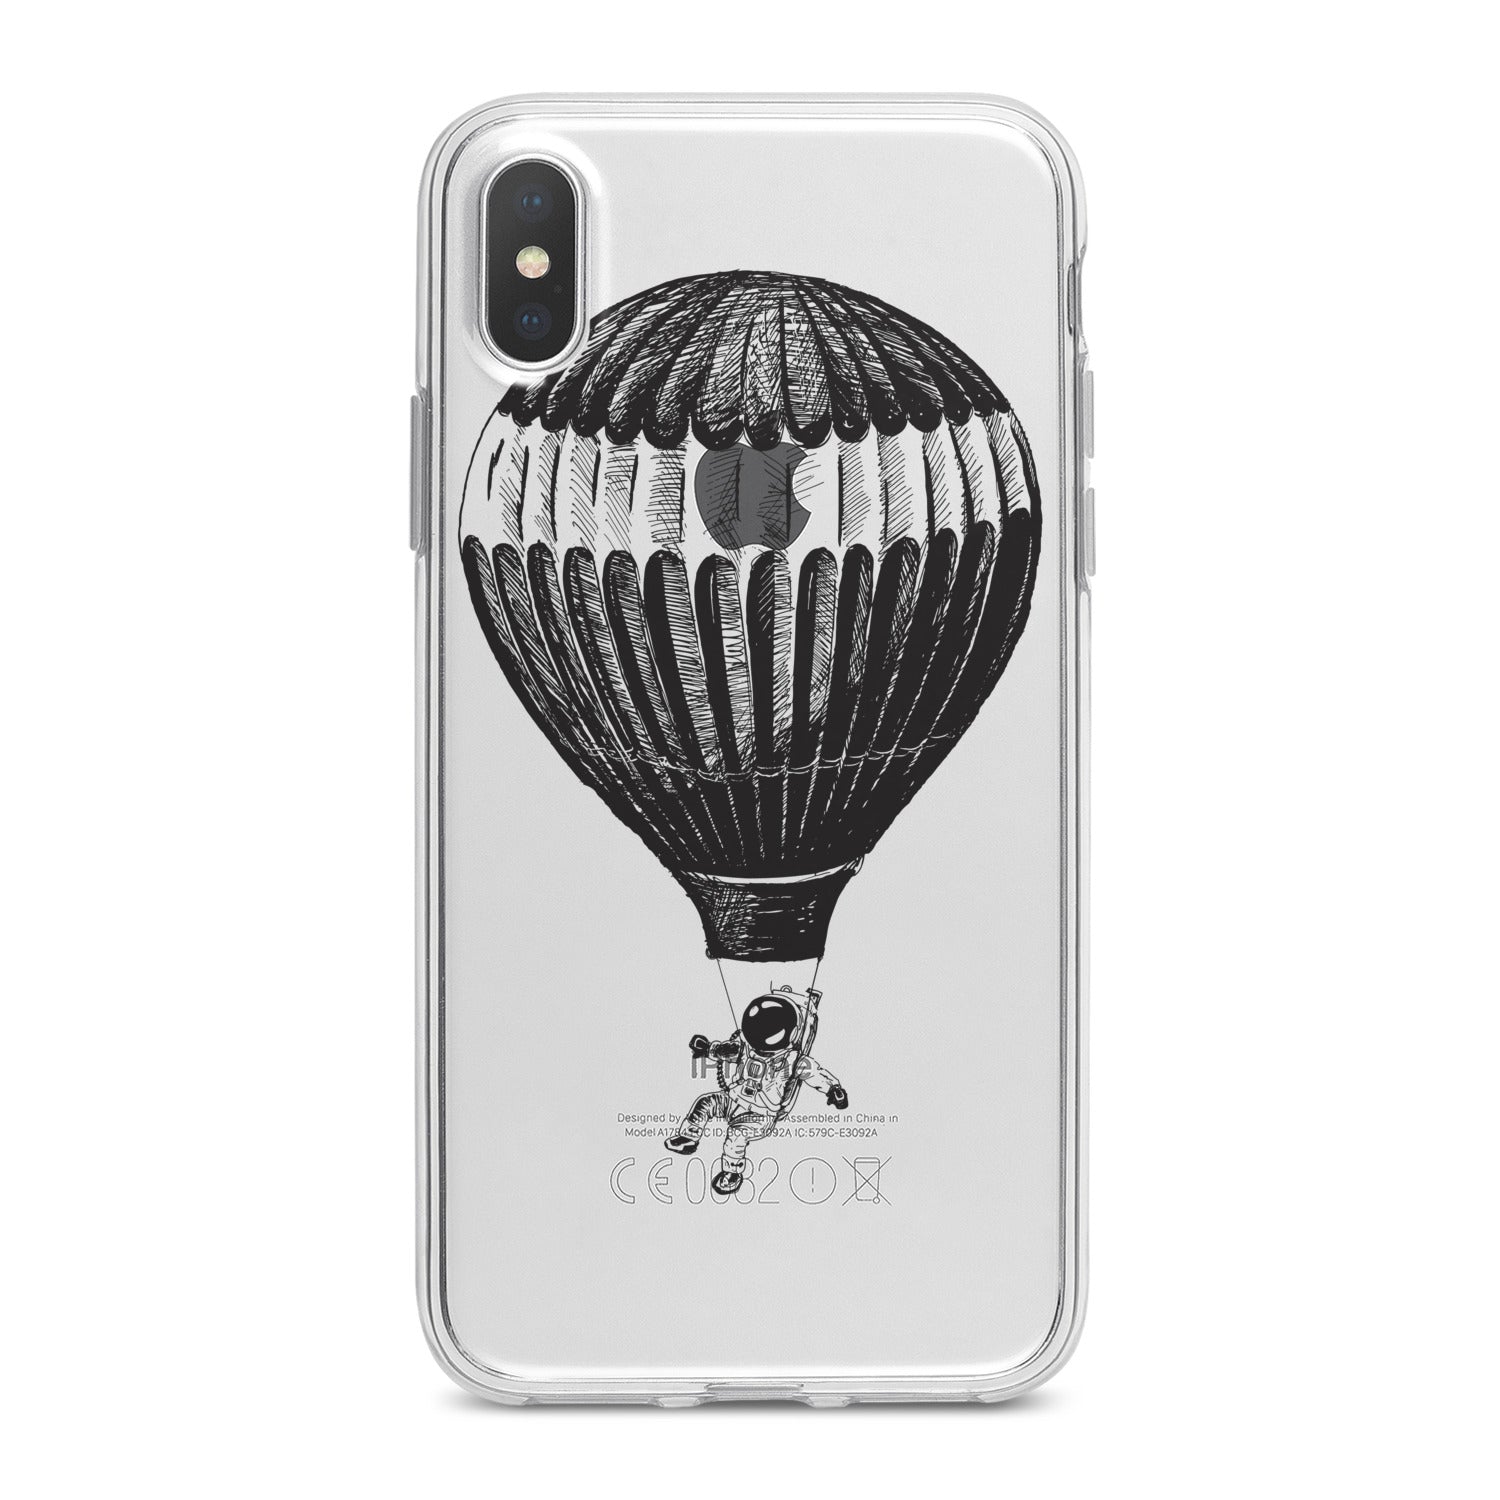 Lex Altern Air Balloon Phone Case for your iPhone & Android phone.